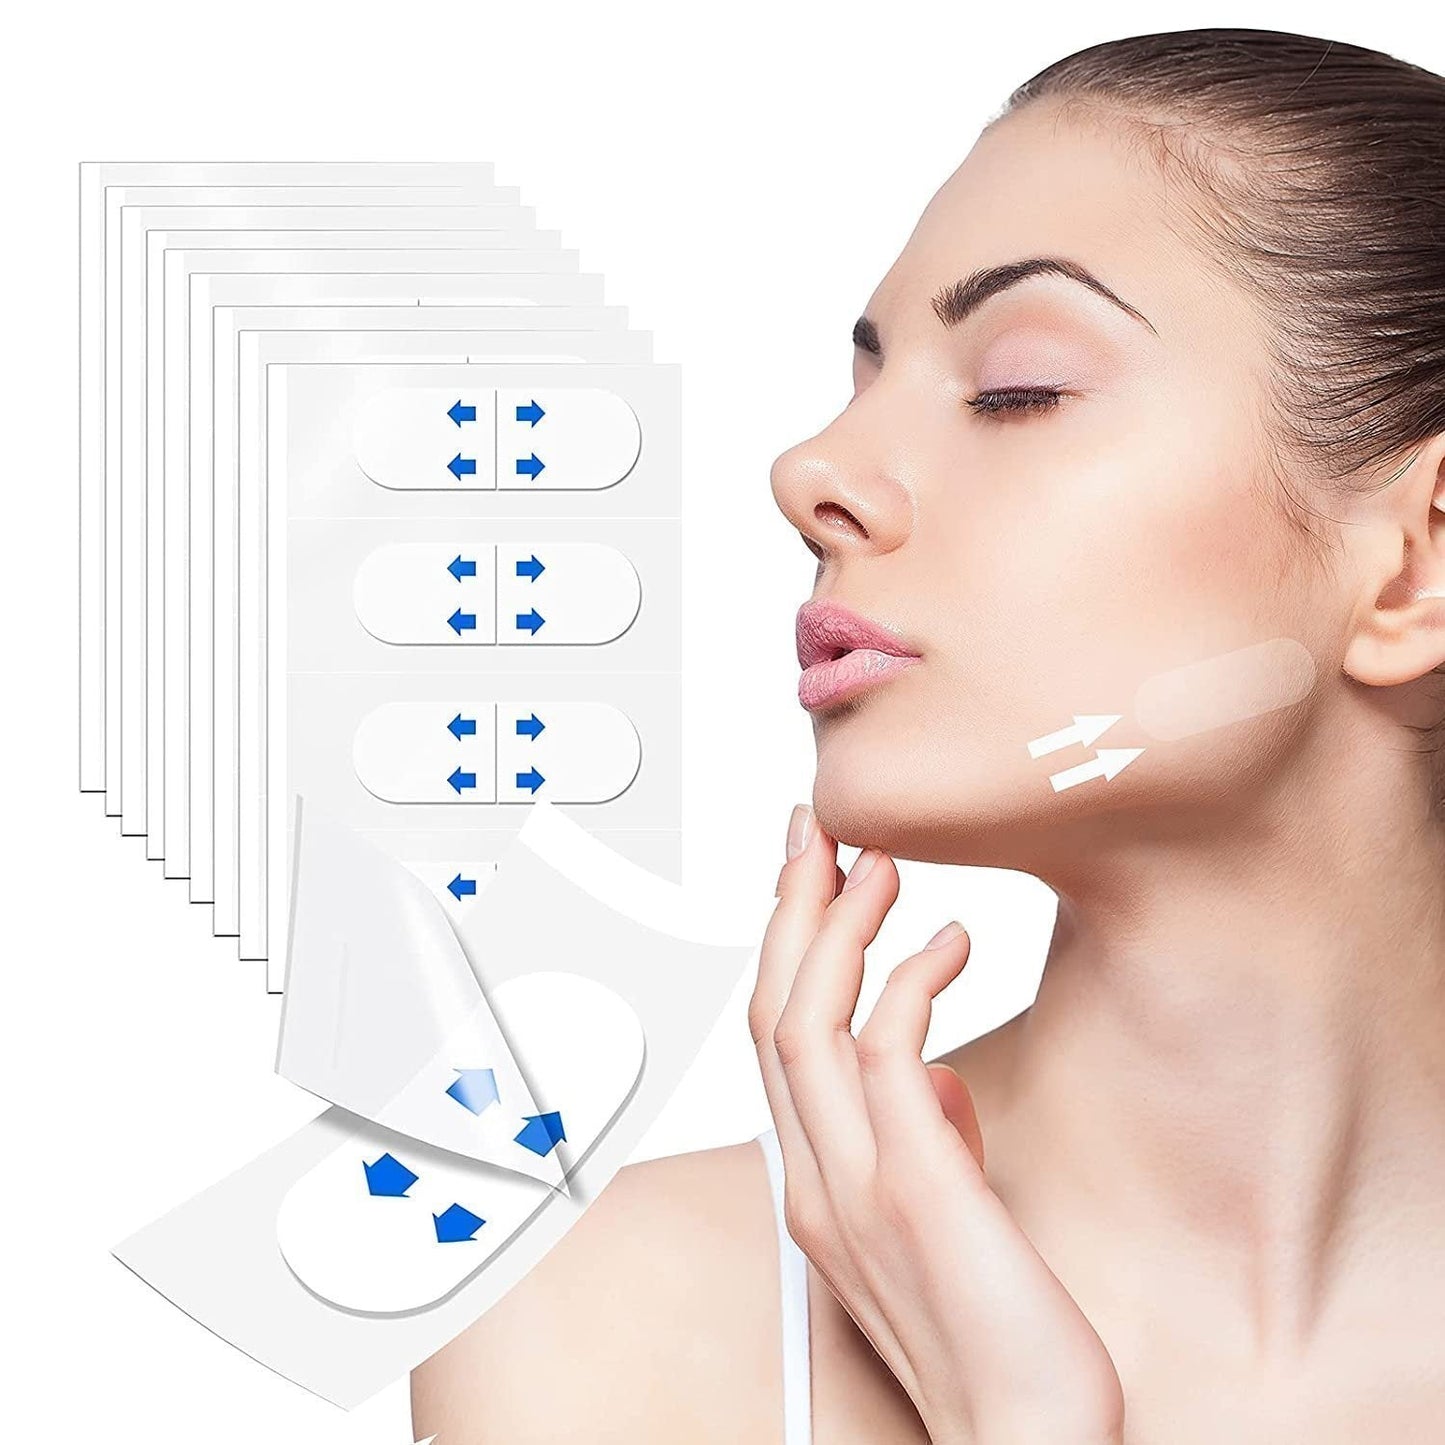 Instantly Lift and Tighten Your Skin with Our Invisible Face Lifter Tape - 49% Off Summer Sale!